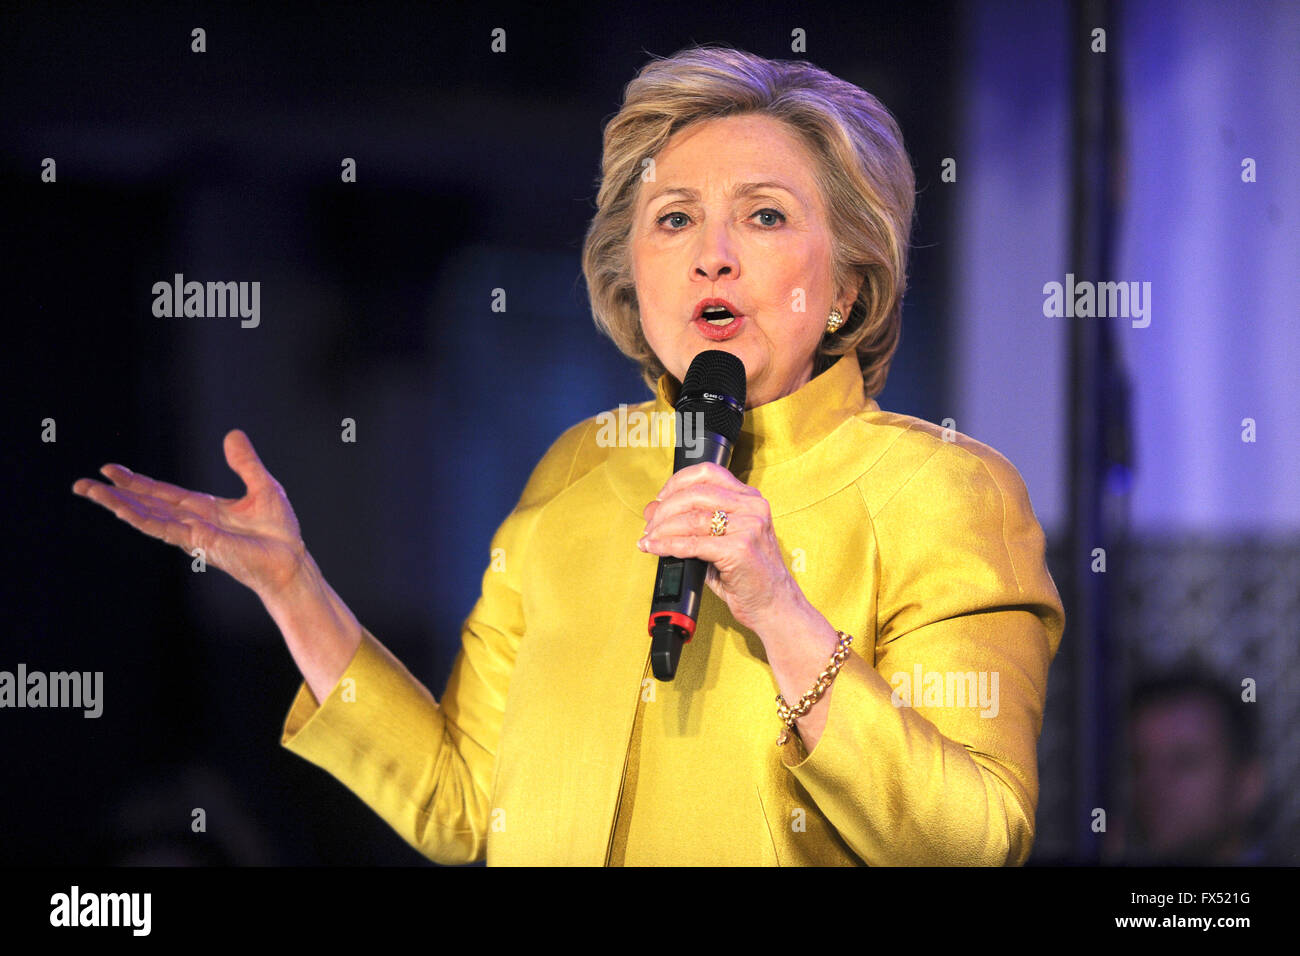 Former United States Secretary of State Hillary Rodham Clinton, a candidate for the Democratic Party nomination for President of the United States, speaks at the Café & Community in Brooklyn, New York on Sunday April 10, 2016. Stock Photo